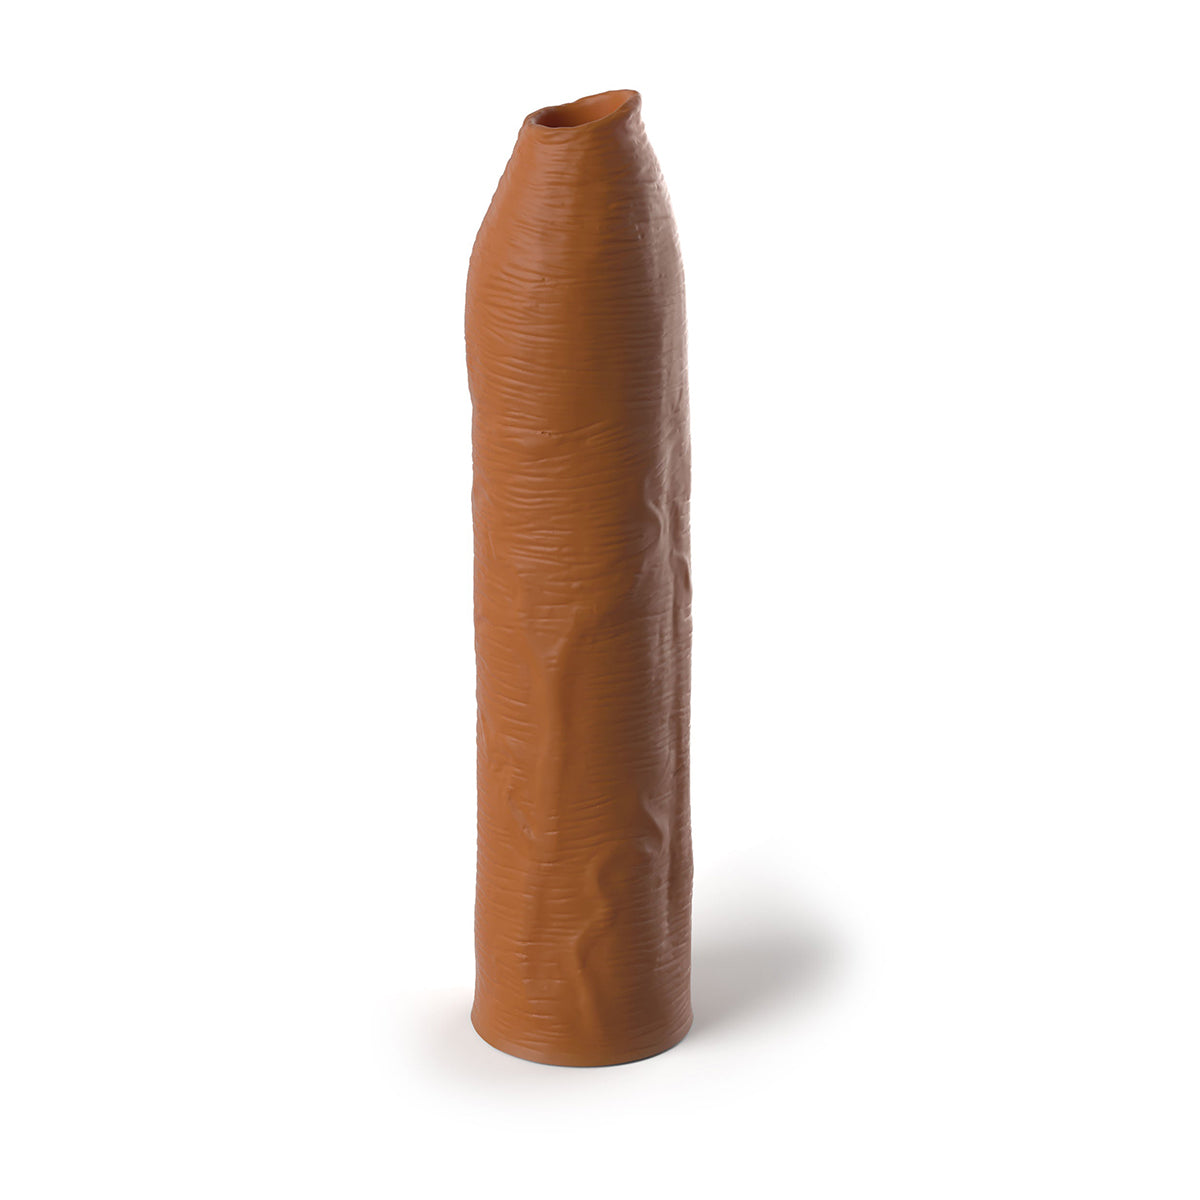 Uncut 7" Silicone Penis Enhancer - Tan - Thorn & Feather